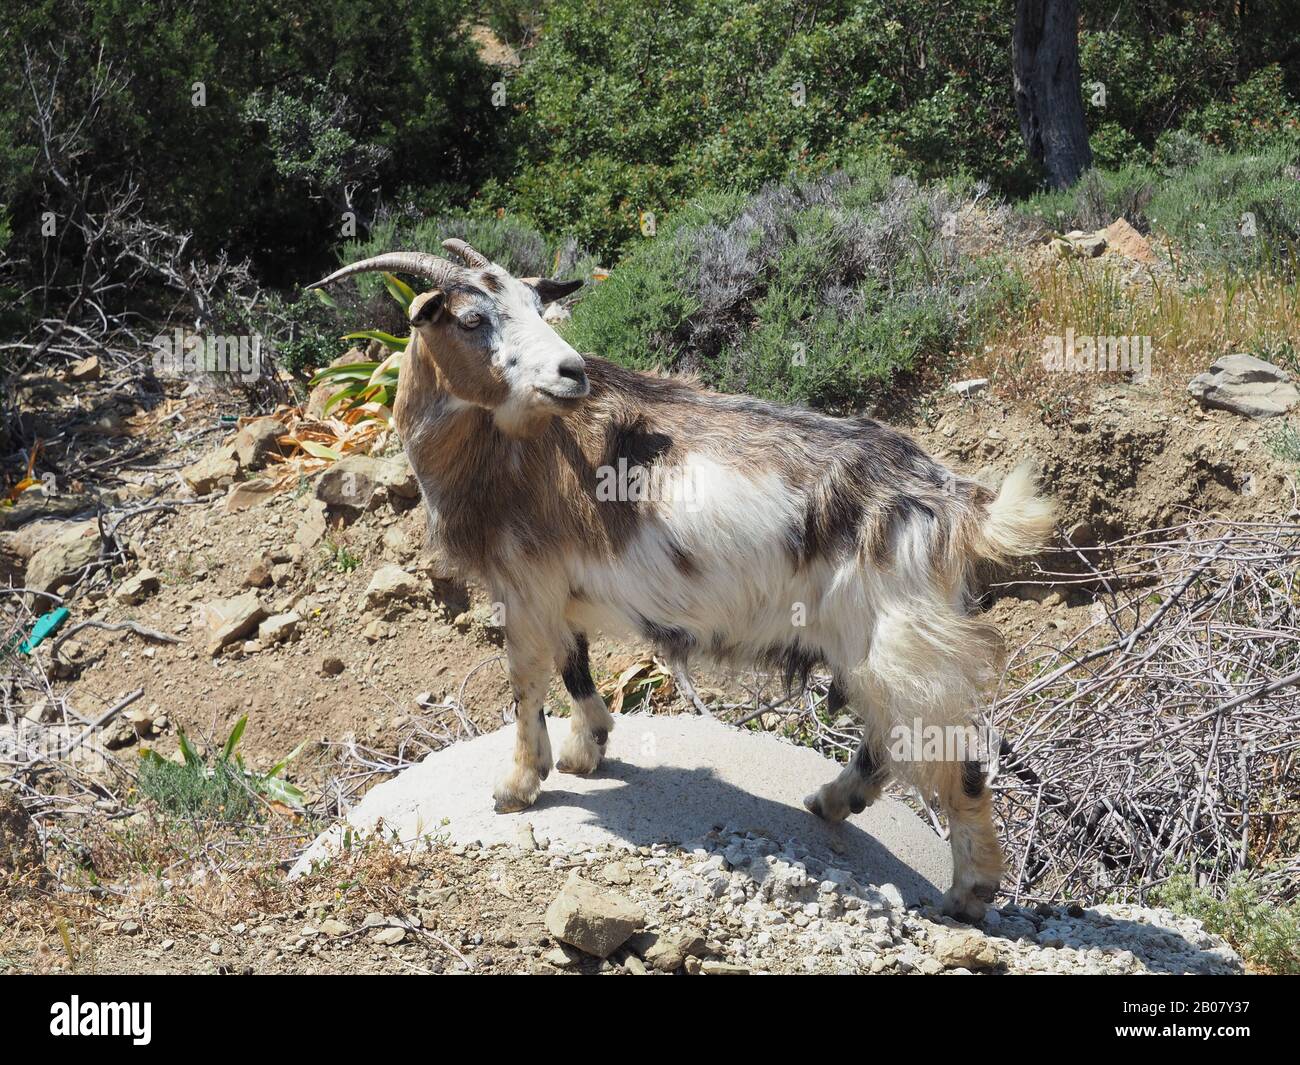 Greek goat with long horns and shaggy brown and white coat on Poros Island, Peloponnese, Greece Stock Photo